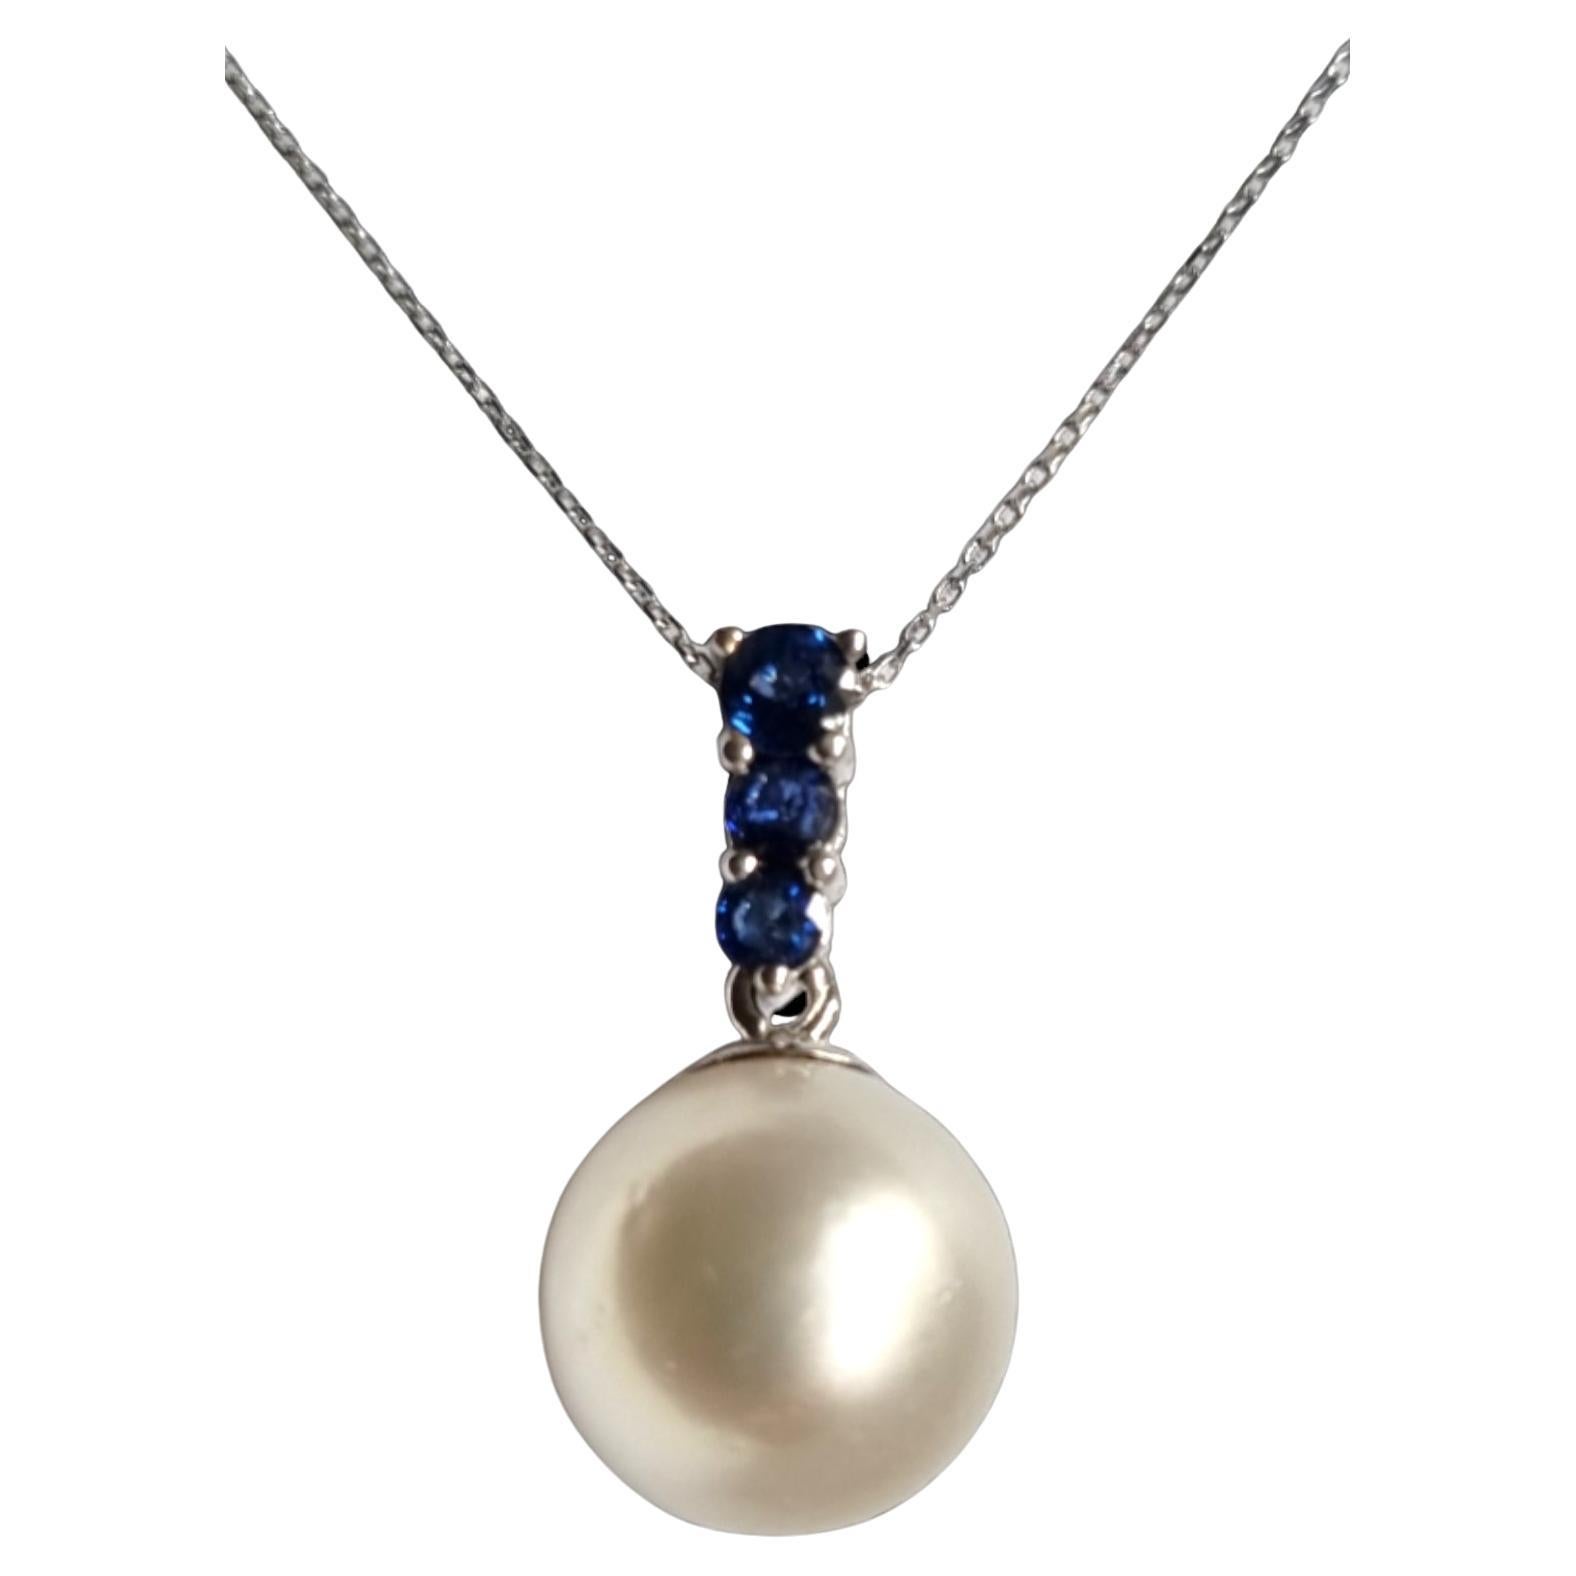 South Sea Pearl and Blue Sapphire Pendant GIA Certified